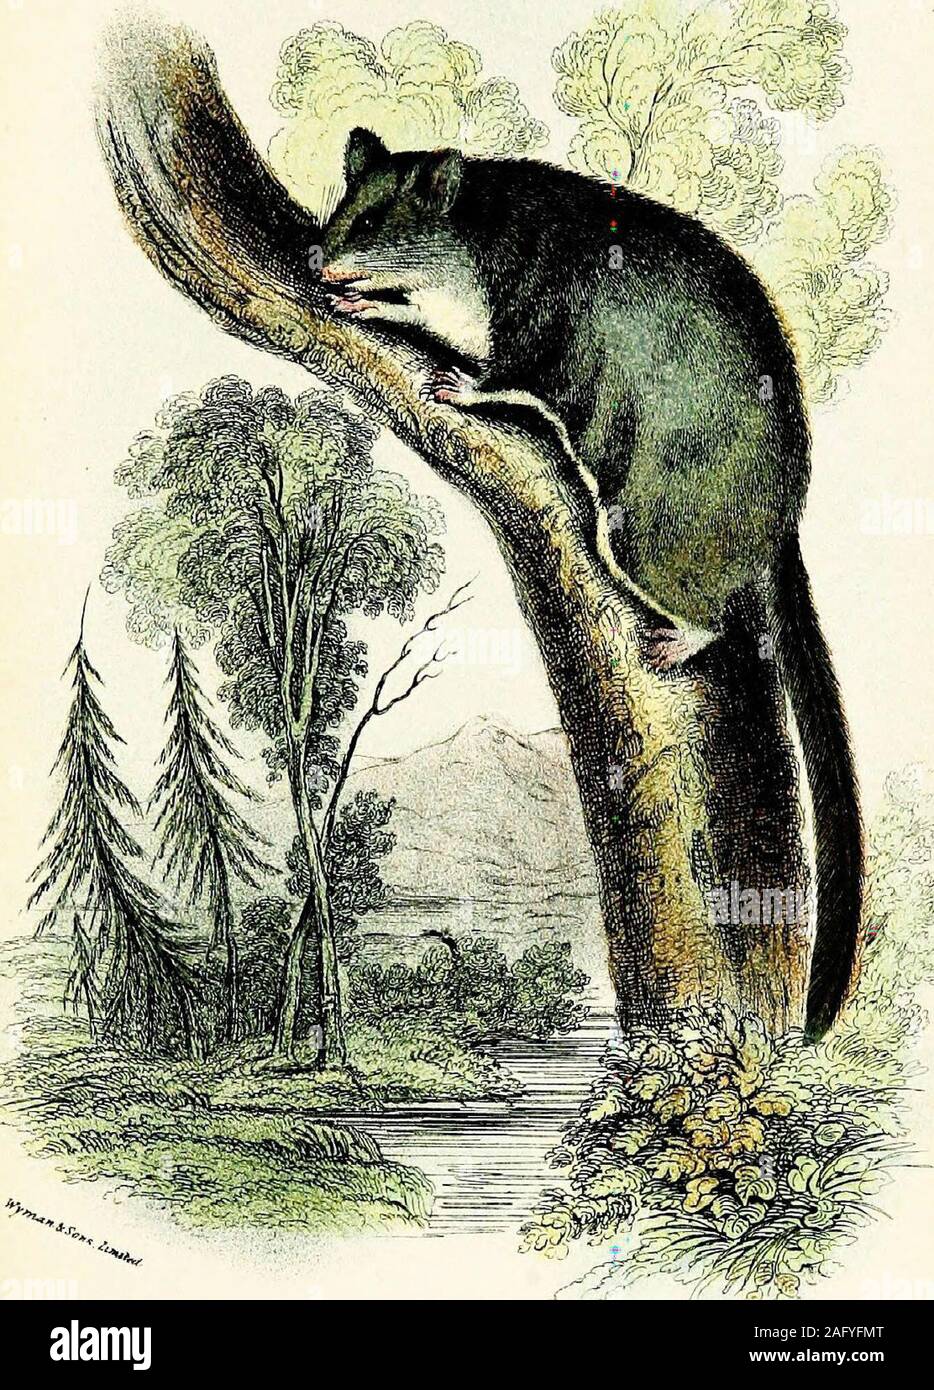 . A hand-book to the marsupialia and monotremata. wn; feet brown.Tufts of hairs present behind the eyes and inside the ears, thelatter being fawn-colour on the outer sides anteriorly andwhite posteriorly ; margins of parachute fringed with longishhairs. Tail rather long, fawn-colour, with its extreme tipnaked inferiorly and probably preherisile. Length of headand body about 3 inches; of tail nearly the same. Distribution.—Queensland, to the south of latitude 20°, NewSouth Wales, and Victoria. HaHts.—Resembling a Common Mouse in size, and henceknown to the colonists as the FlyingMouse, or Oposs Stock Photo